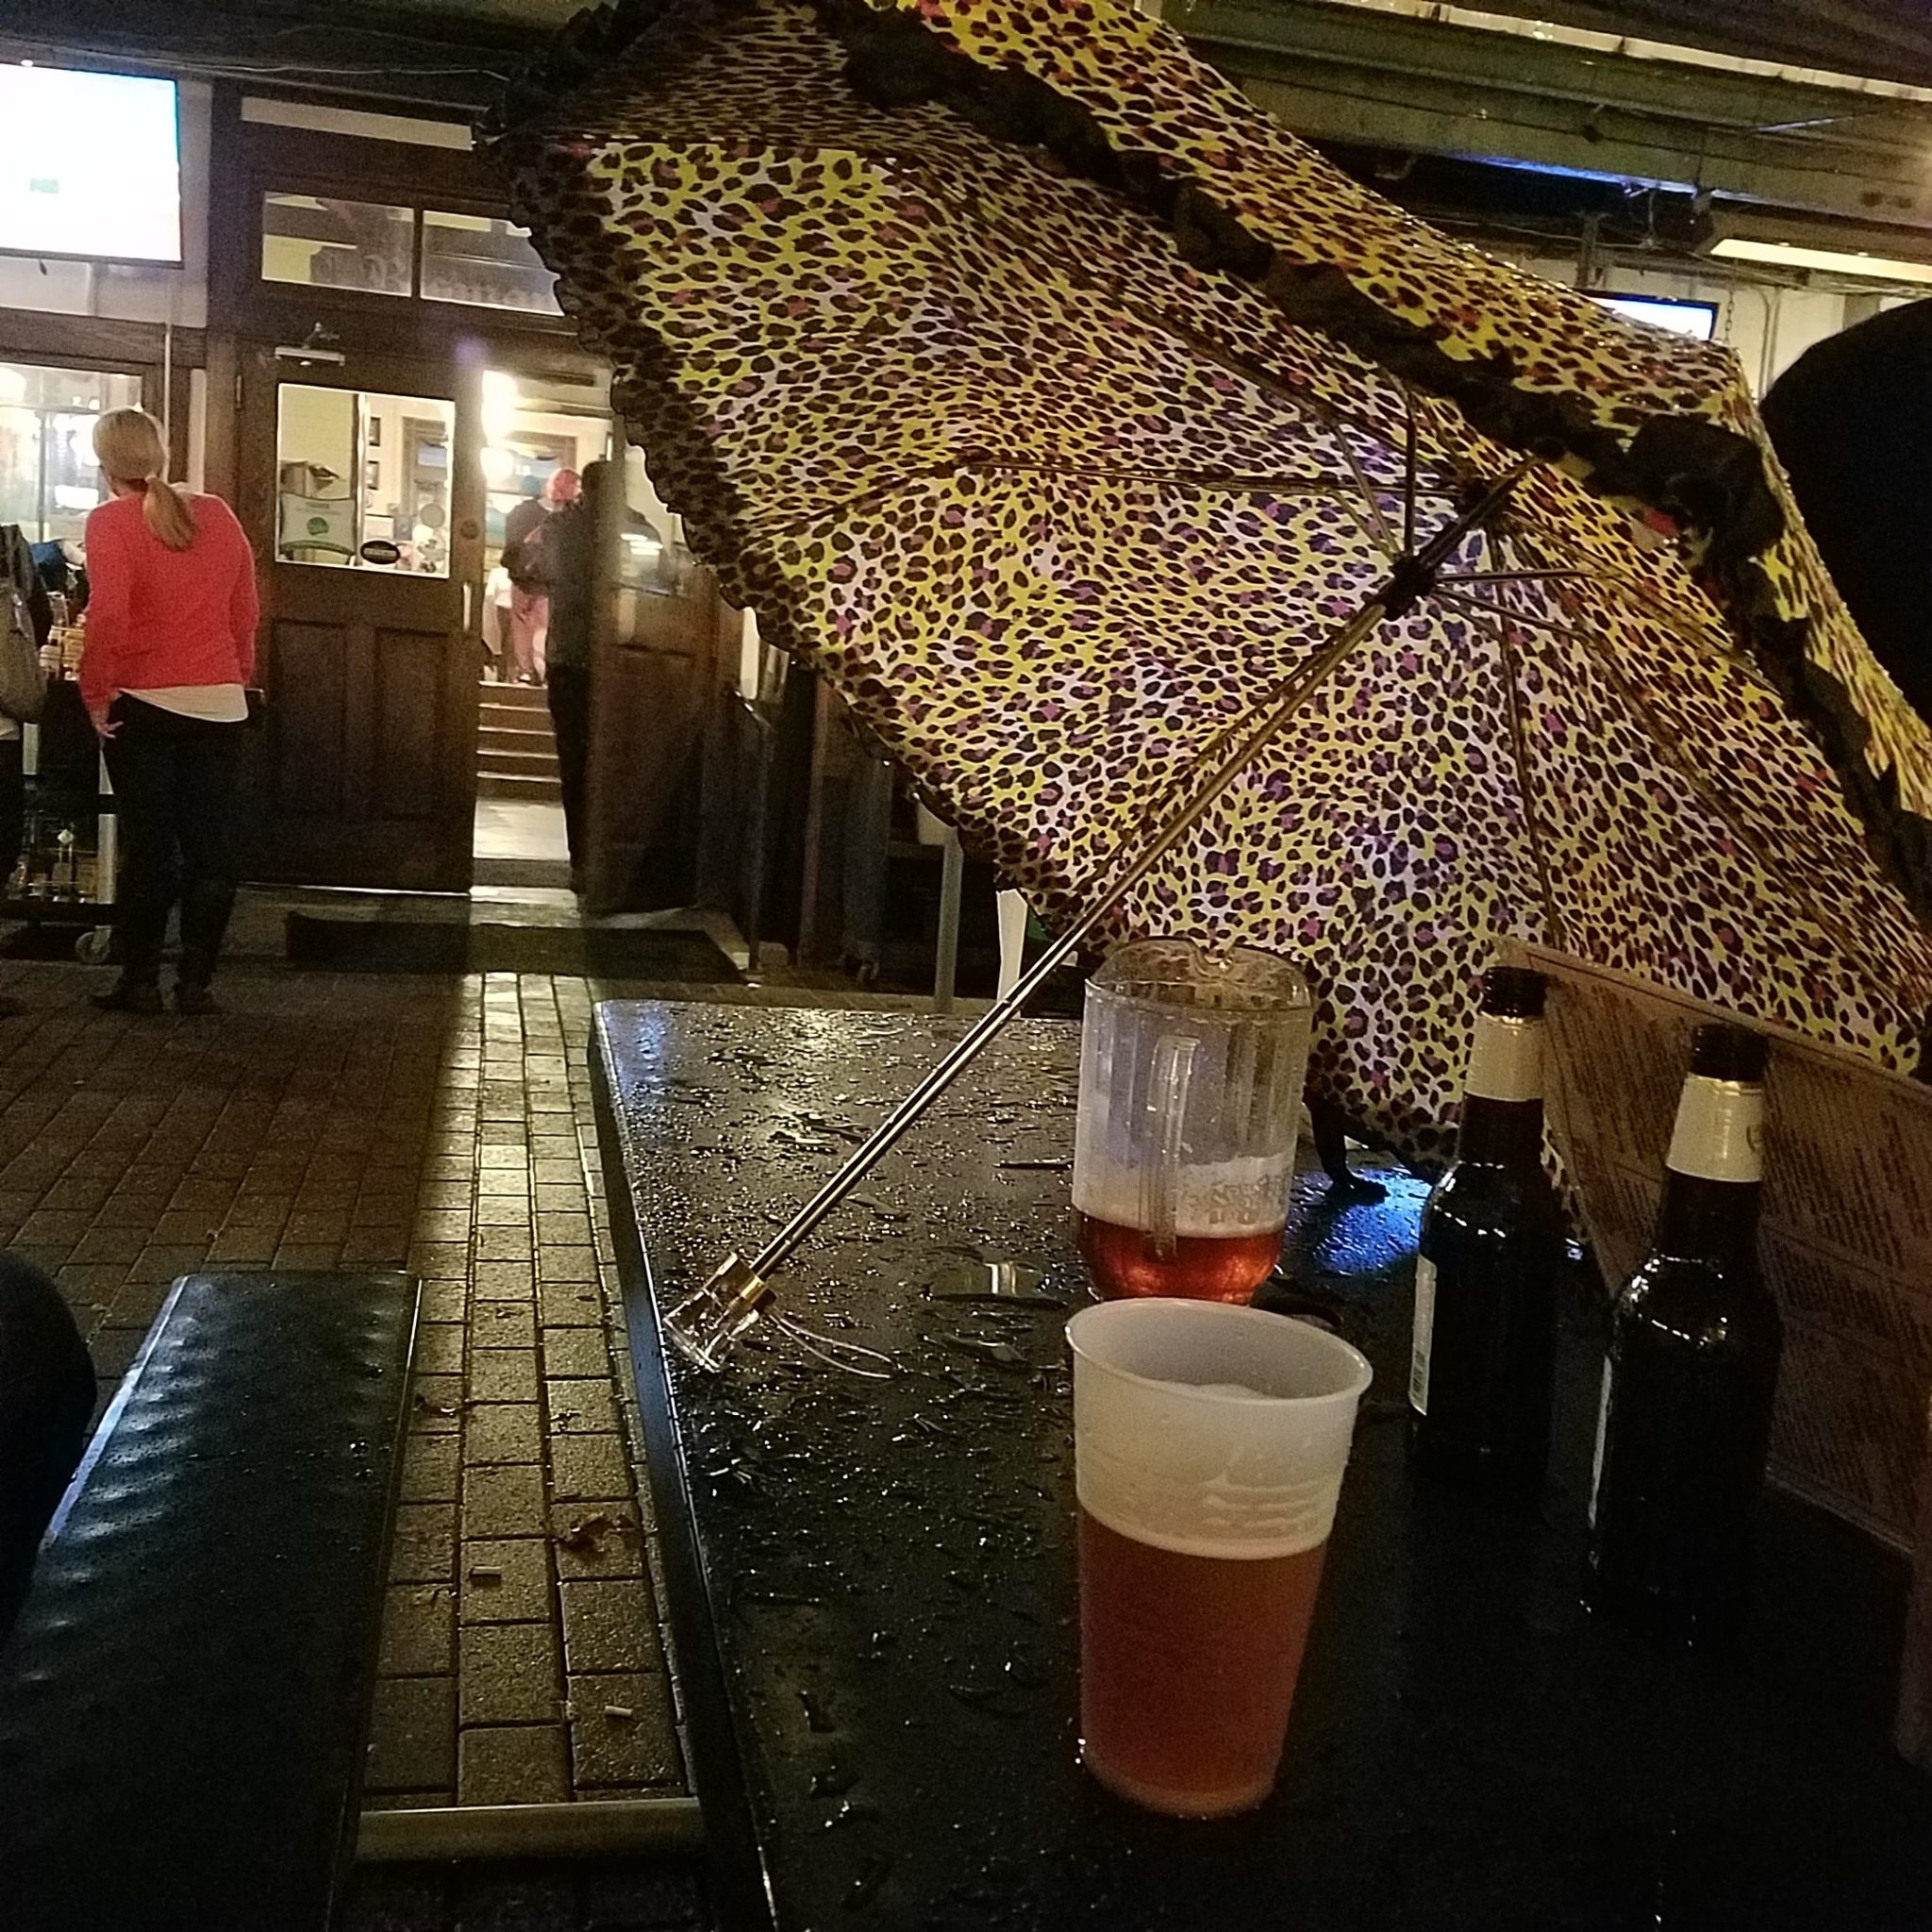 Their eyes may be wet but their beer is staying dry, dammit.